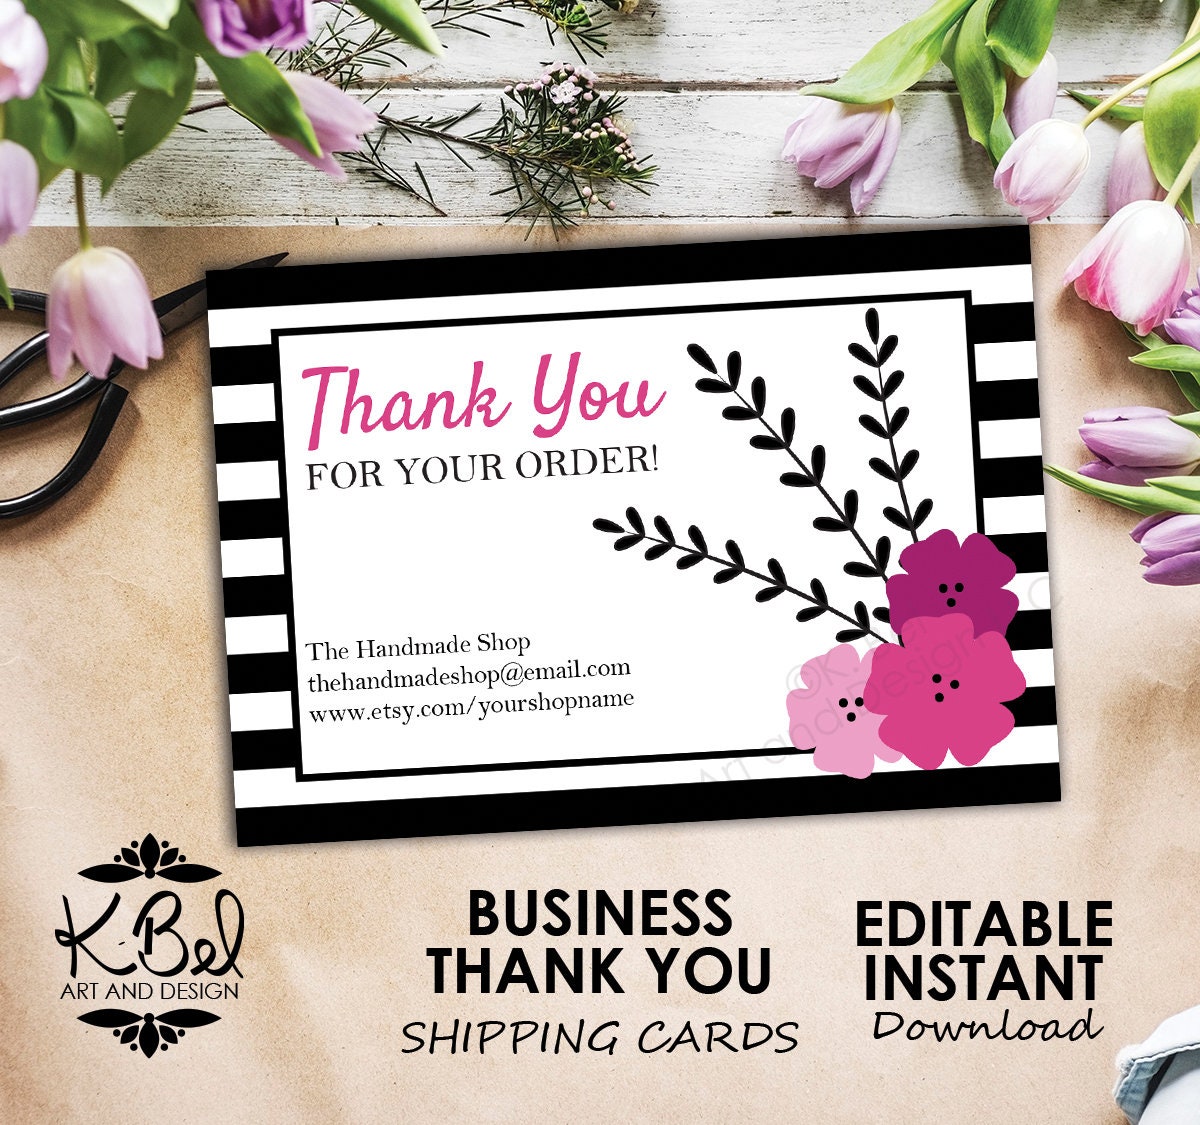 Printable Thank You Business Cards Editable Business Thank | Etsy